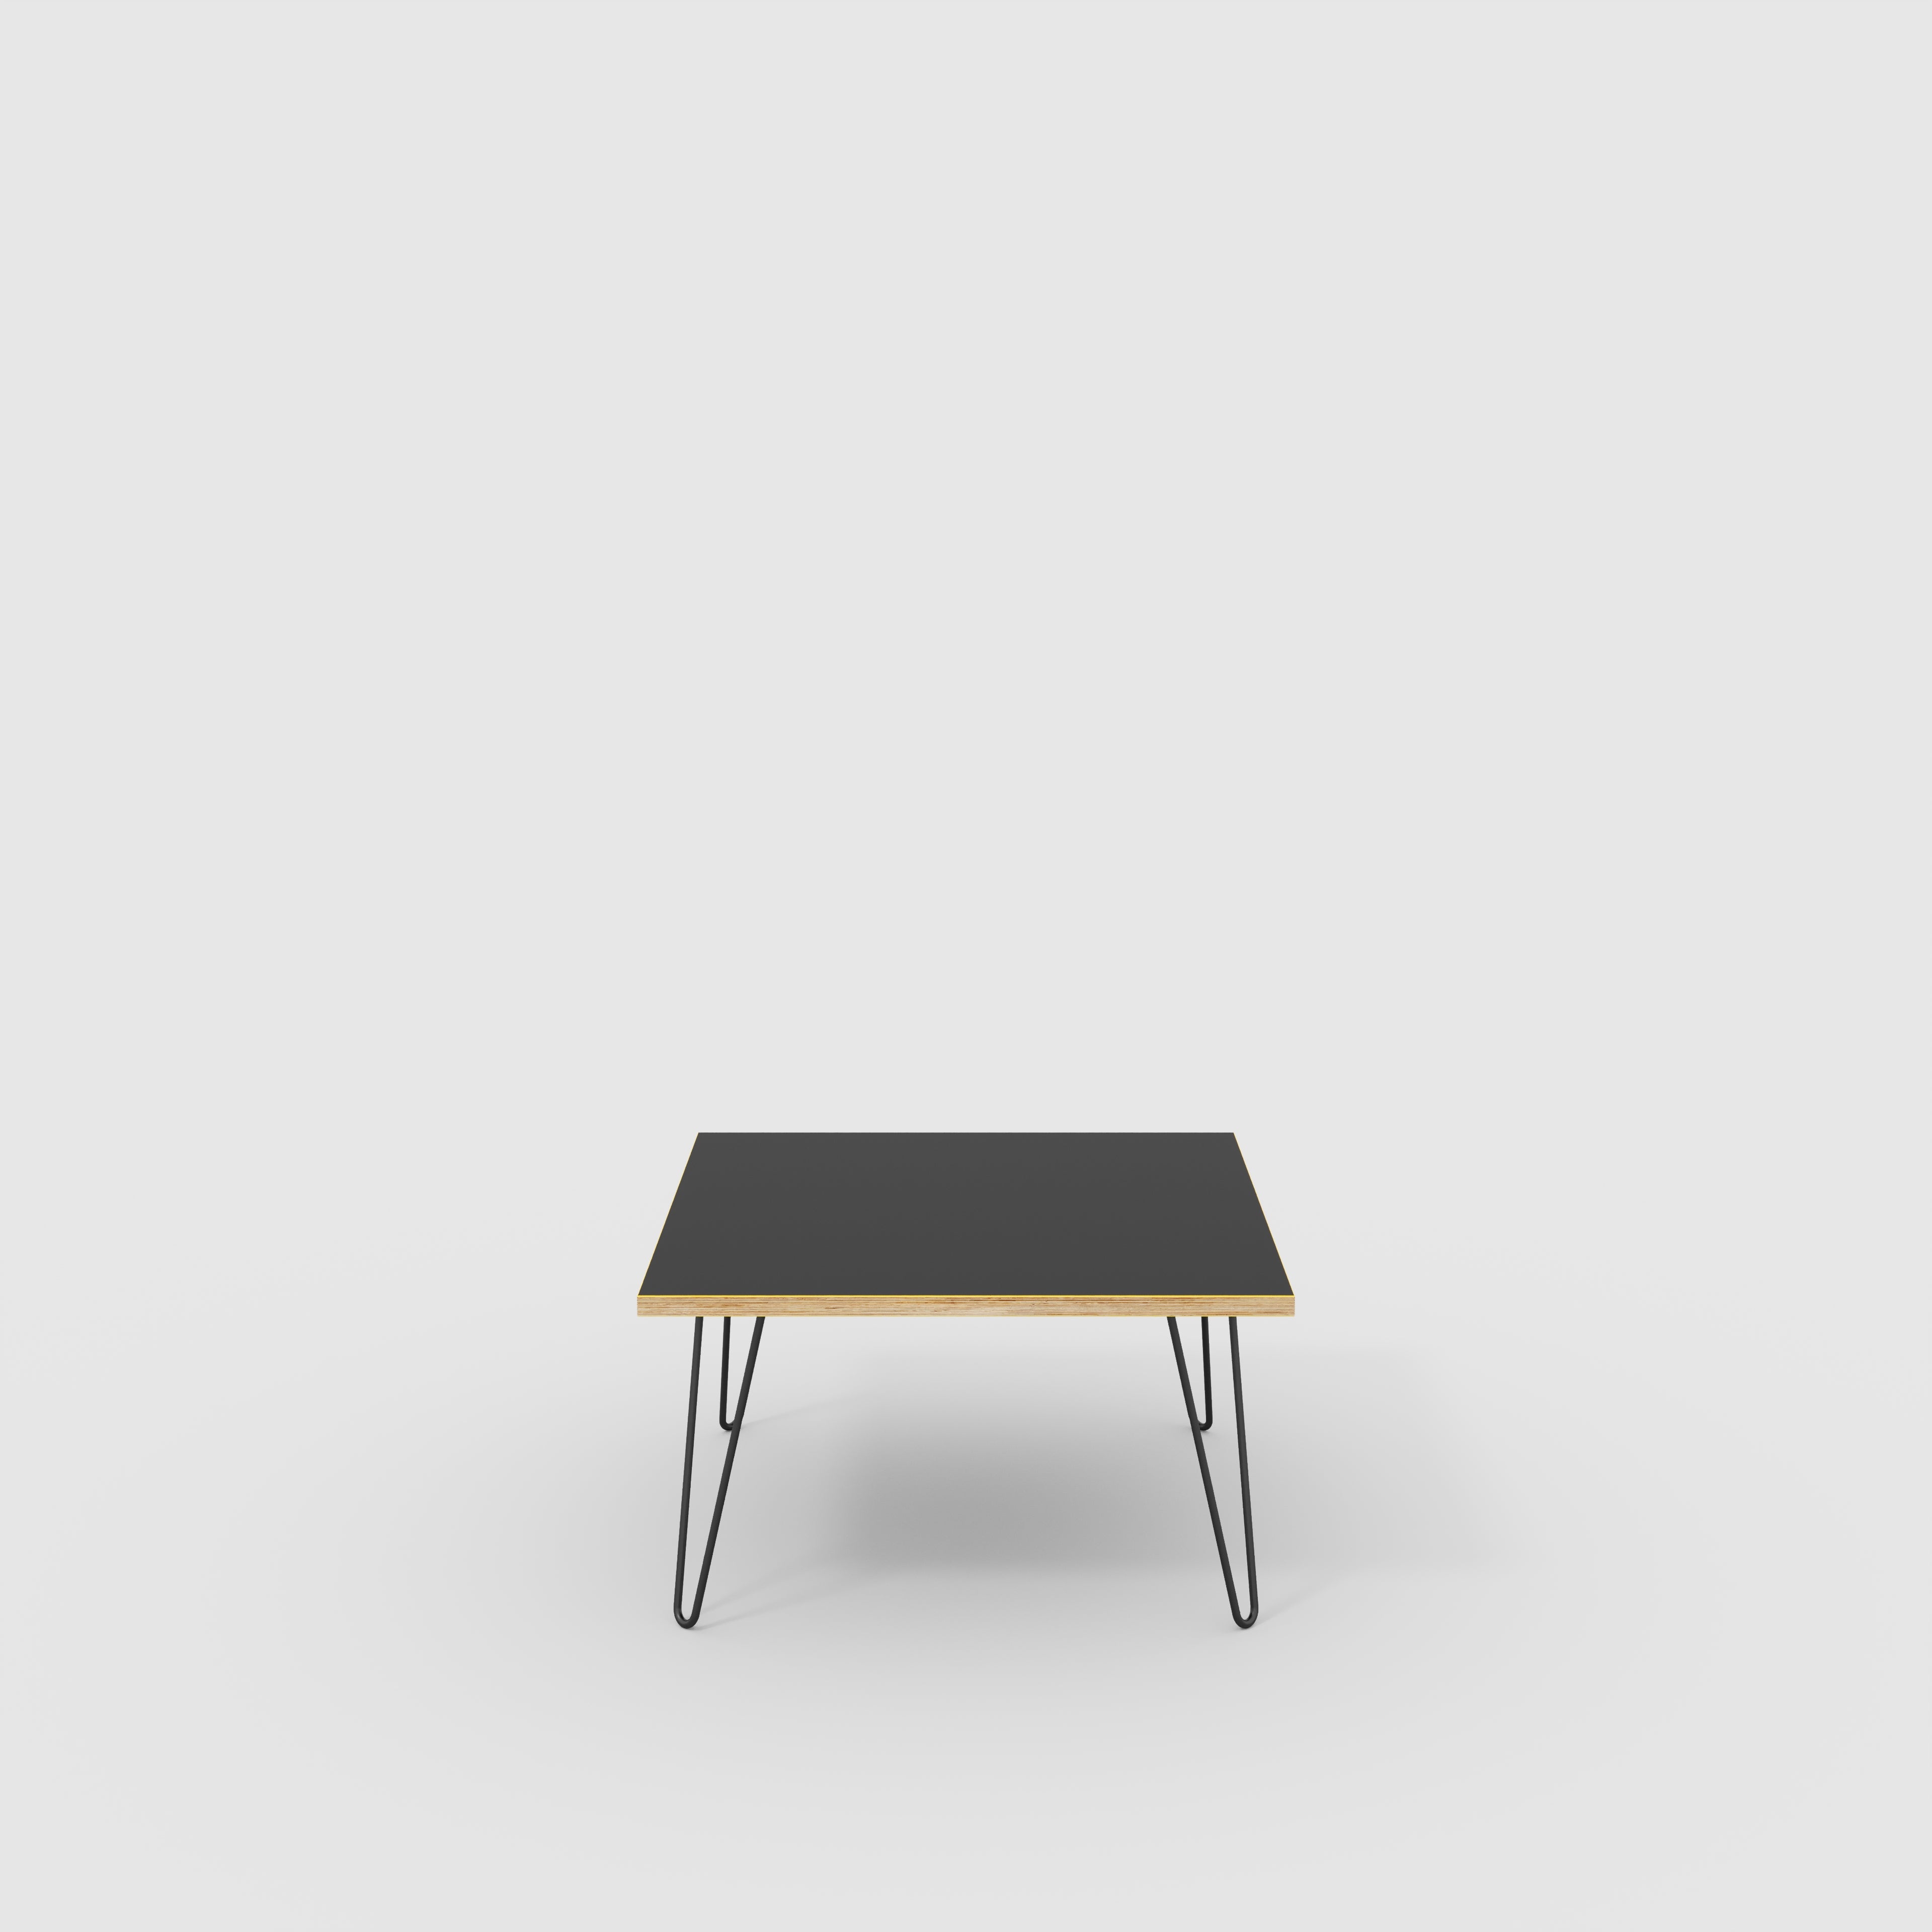 Coffee Table with Black Hairpin Legs - Formica Diamond Black - 800(w) x 800(d) x 425(h)